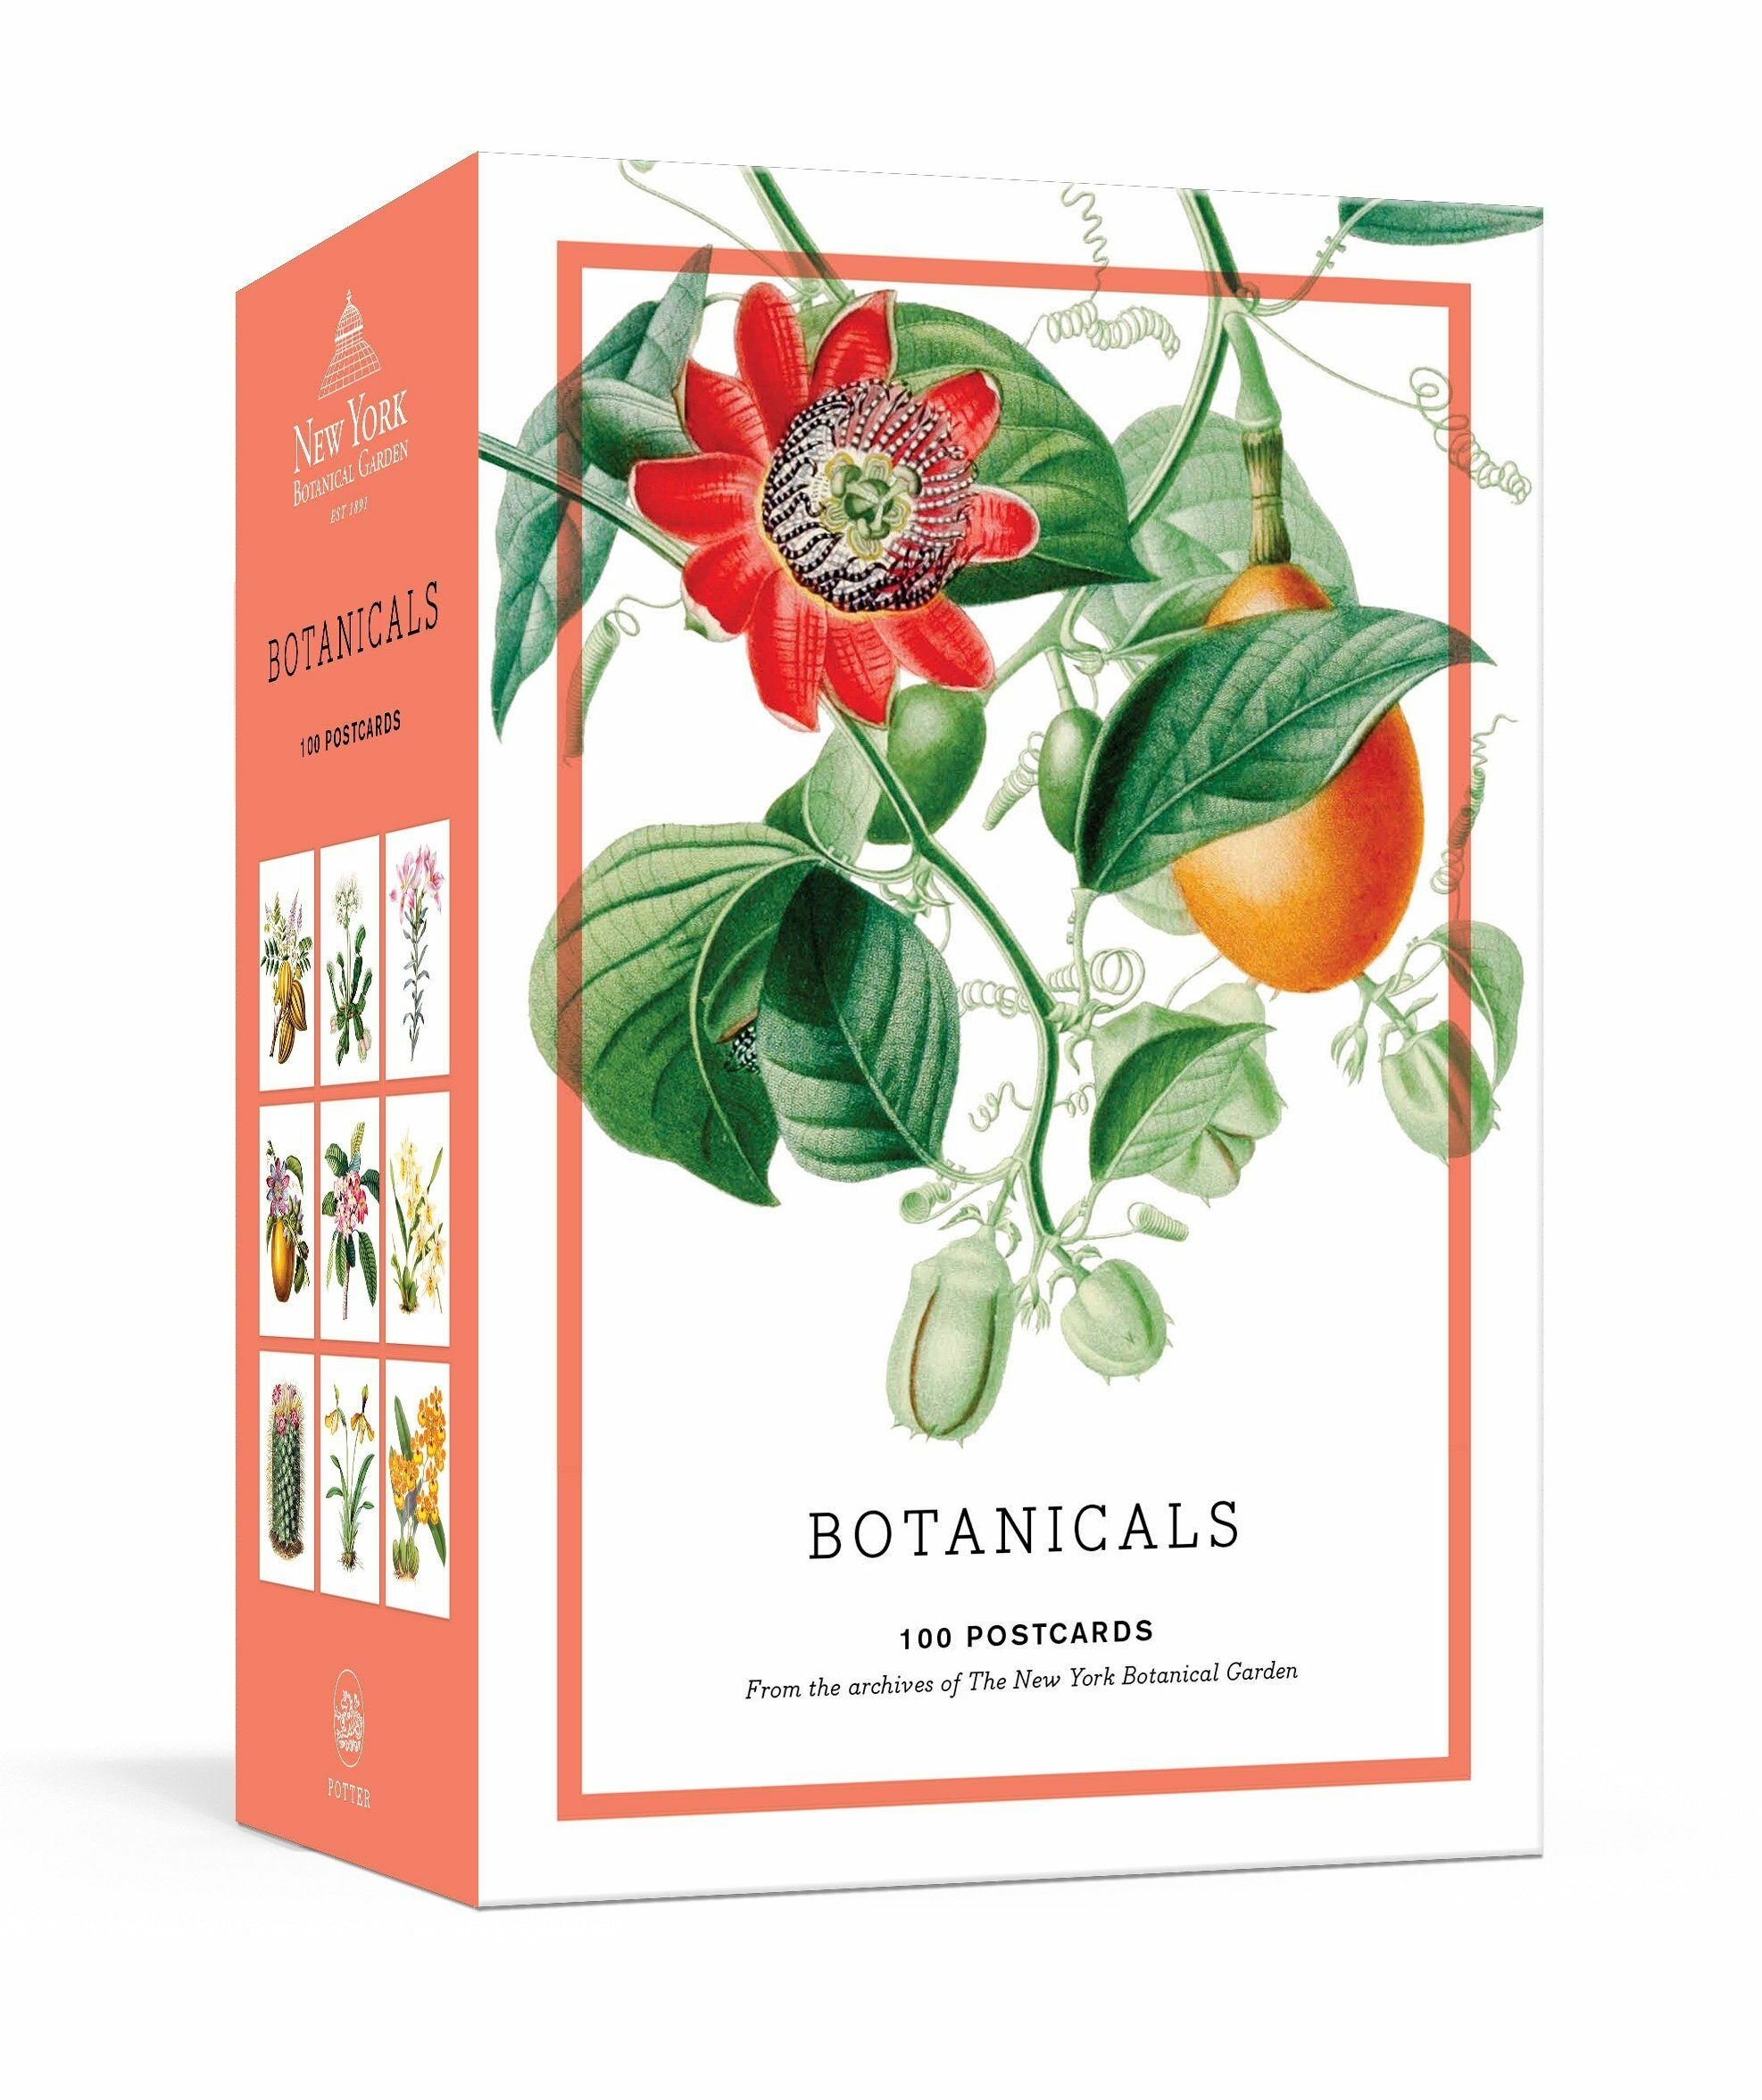 Botanicals: 100 Postcards from the Archives of the New York Botanical Garden (Other)